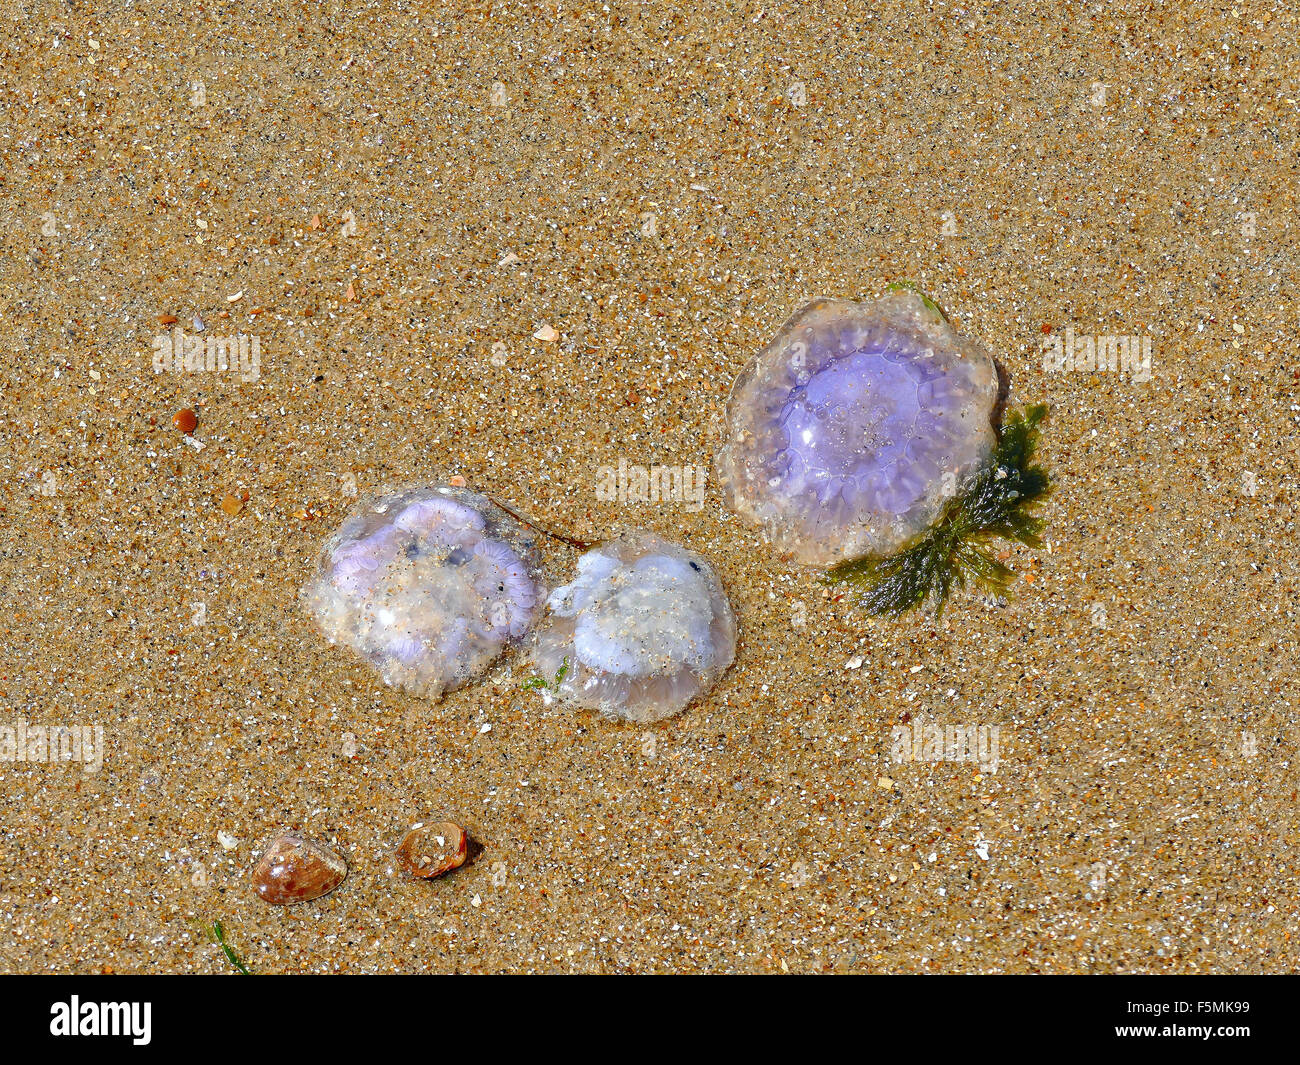 Purple jellyfishes washed up on shore with sea plants and shells on beach Stock Photo